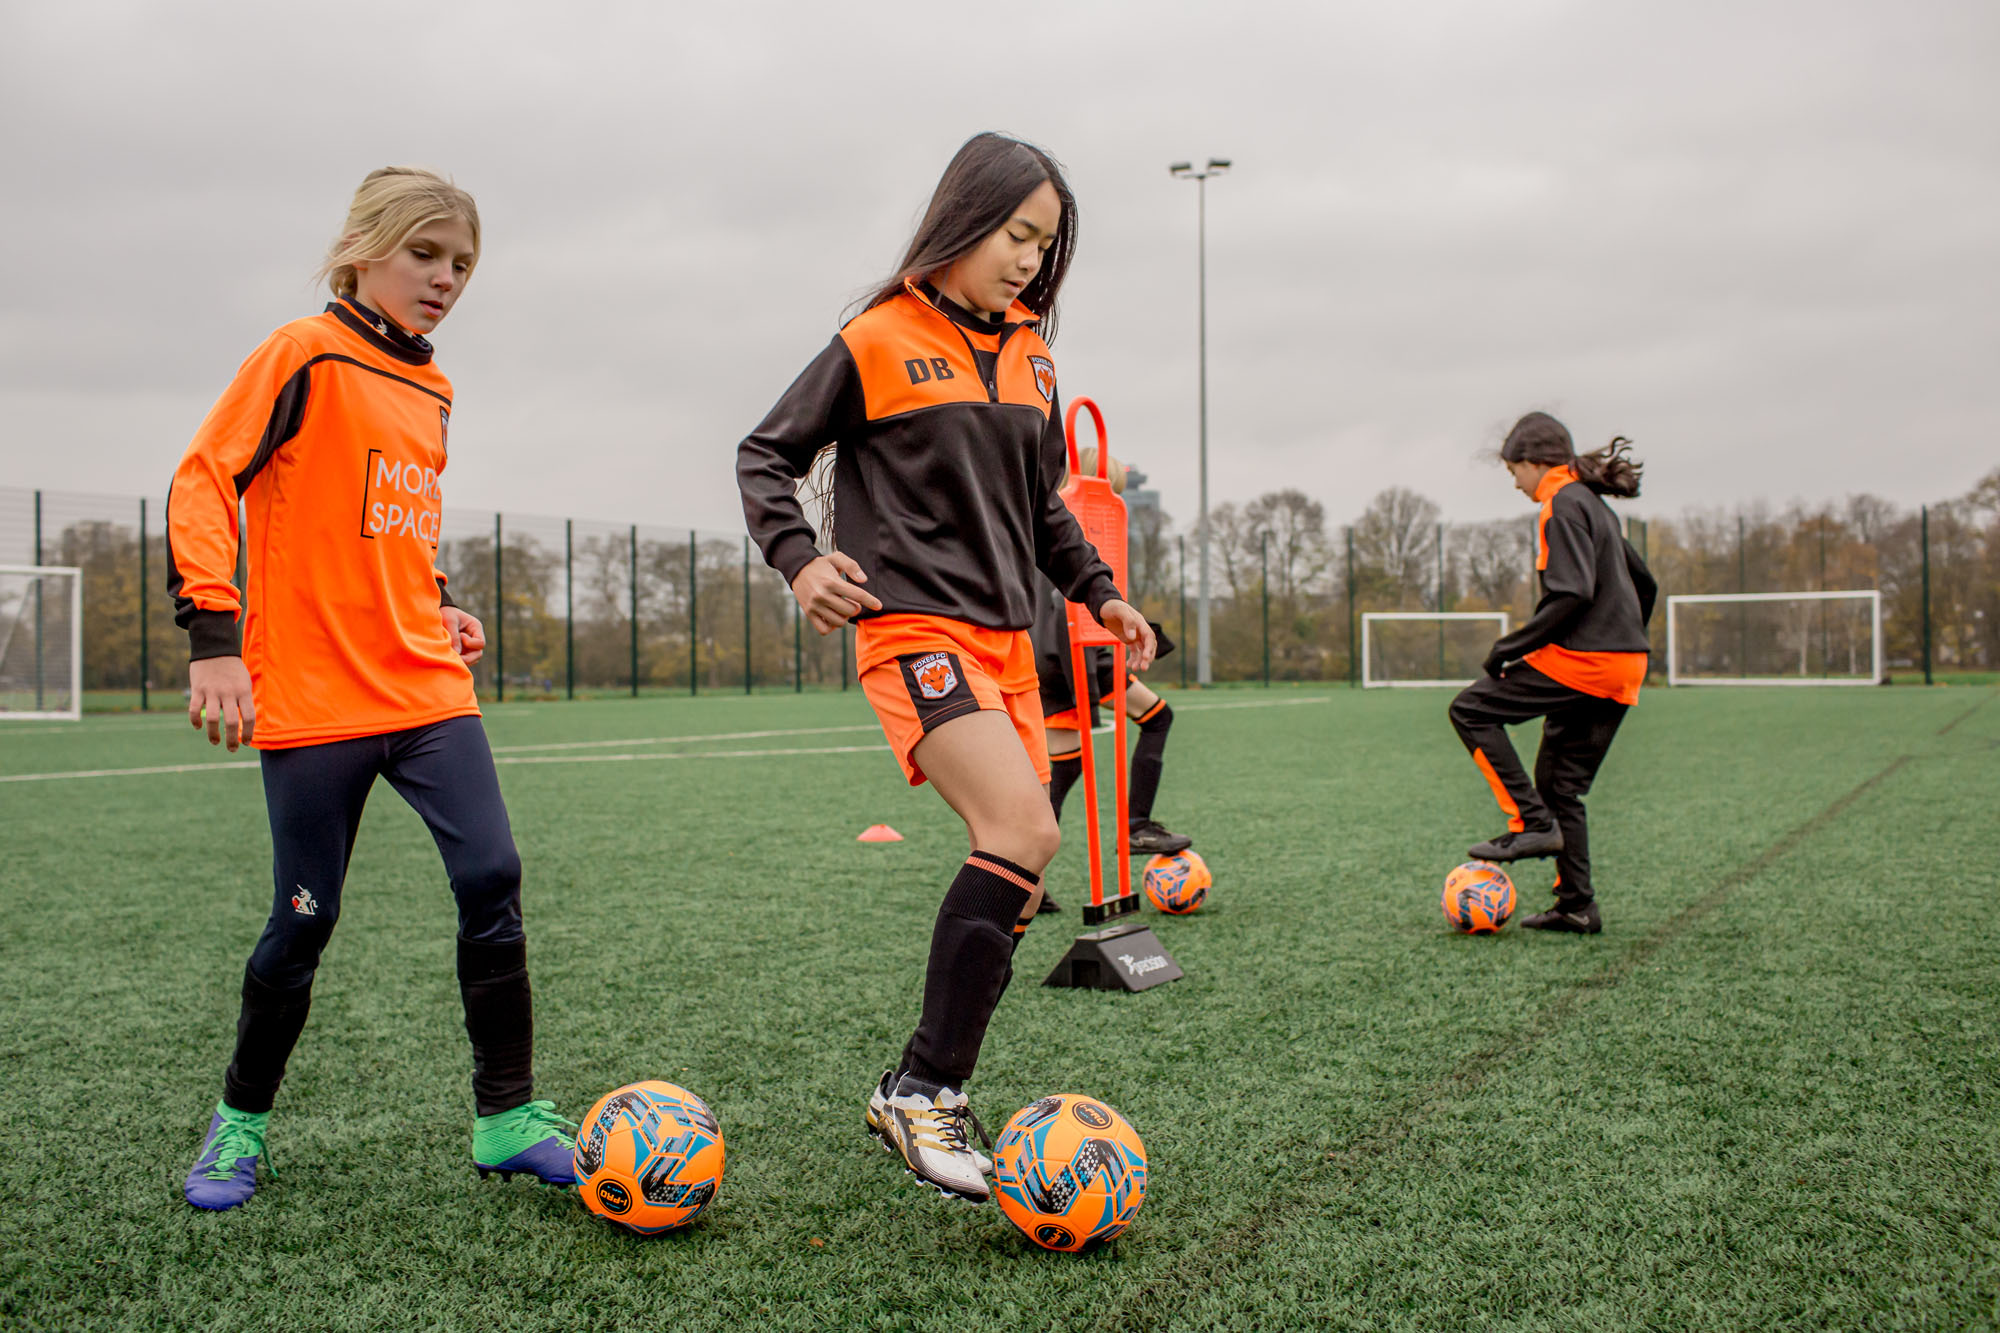 Chiswick Football: Foxes FC – Learning To Play The Beautiful Game